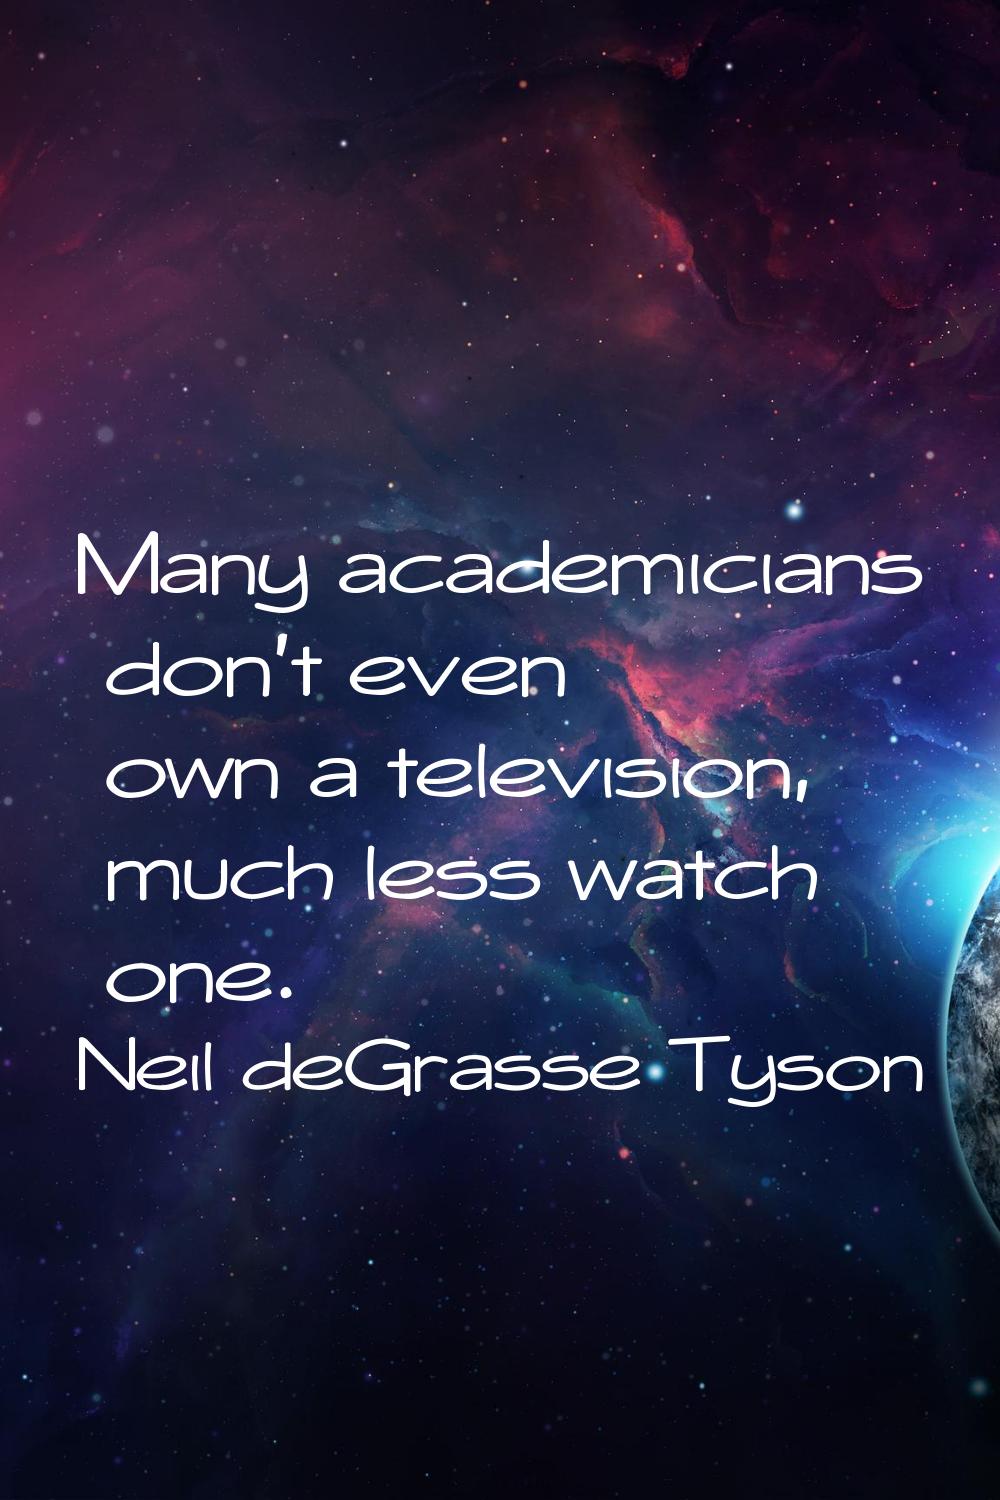 Many academicians don't even own a television, much less watch one.